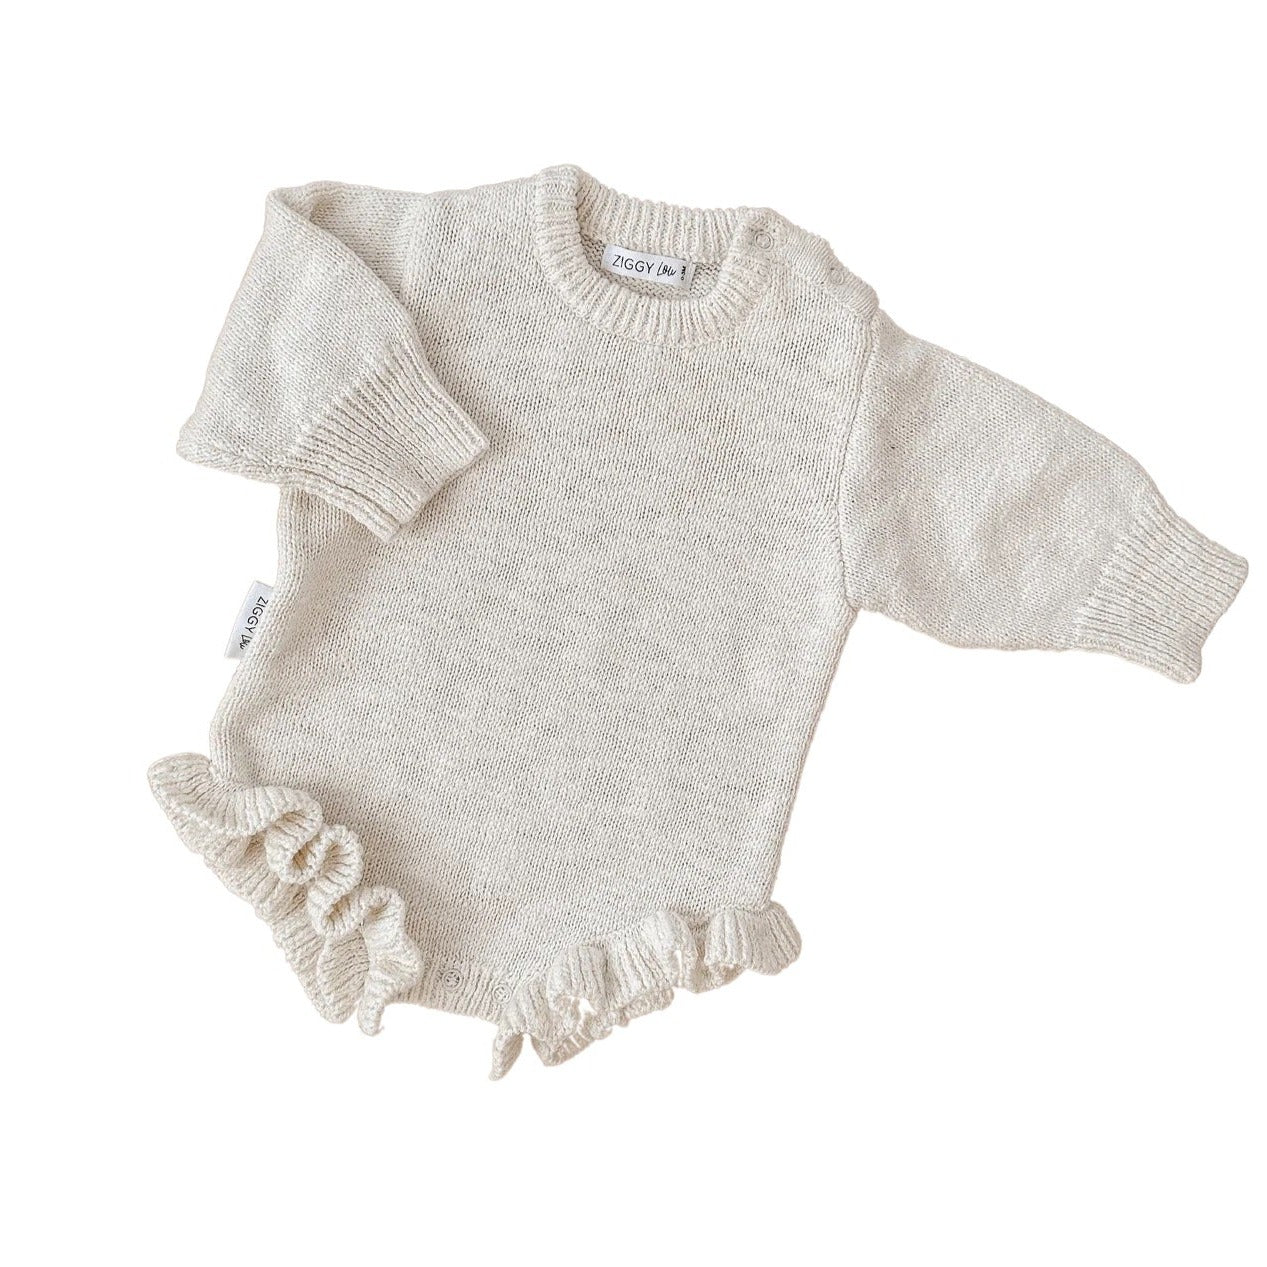 Ziggy Lou bubble romper - angus and dudley